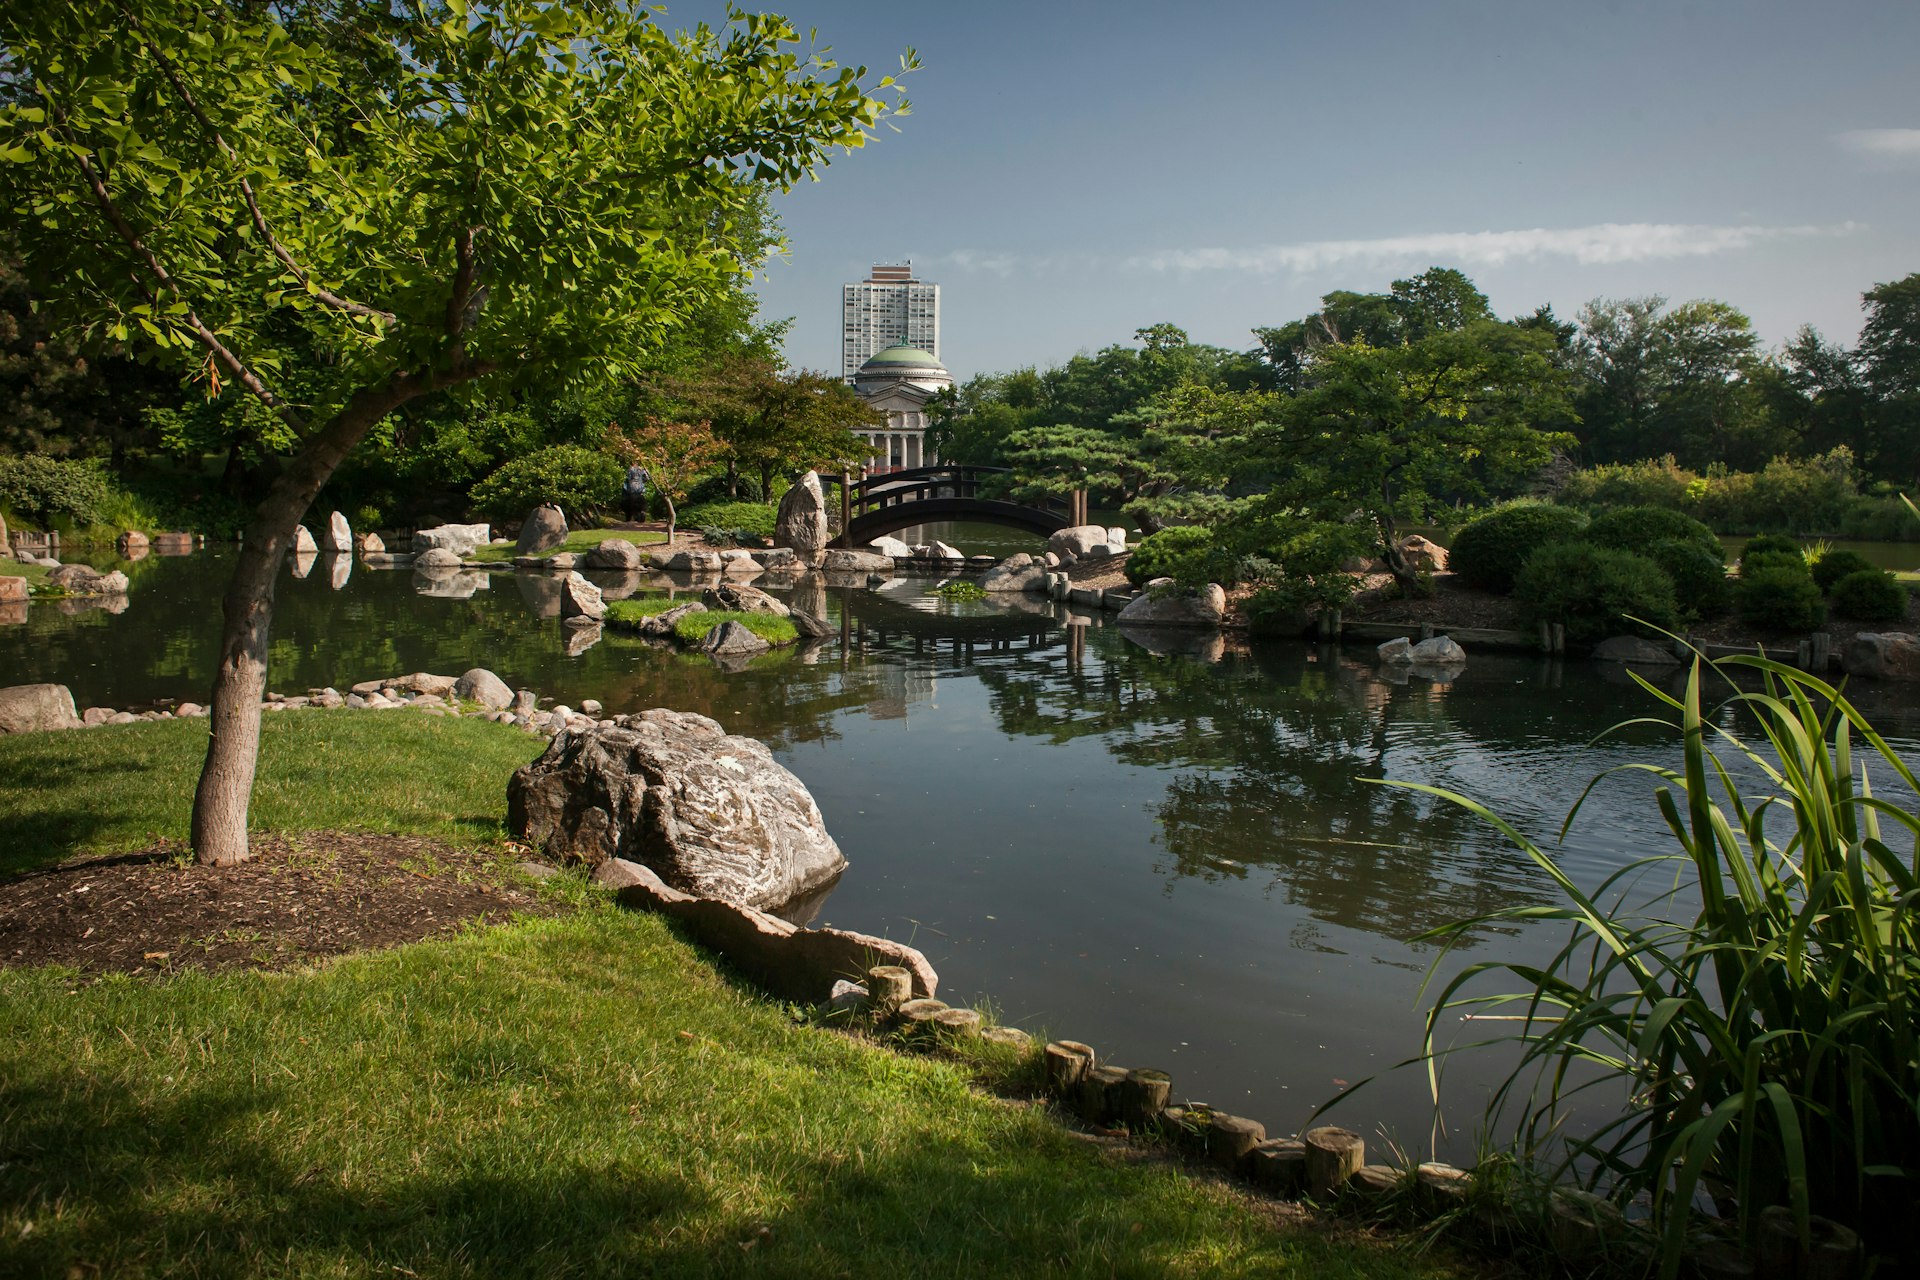 The Osaka Japanese Garden (Garden of the Phoenix), with the Museum of Science & Industry in the background.